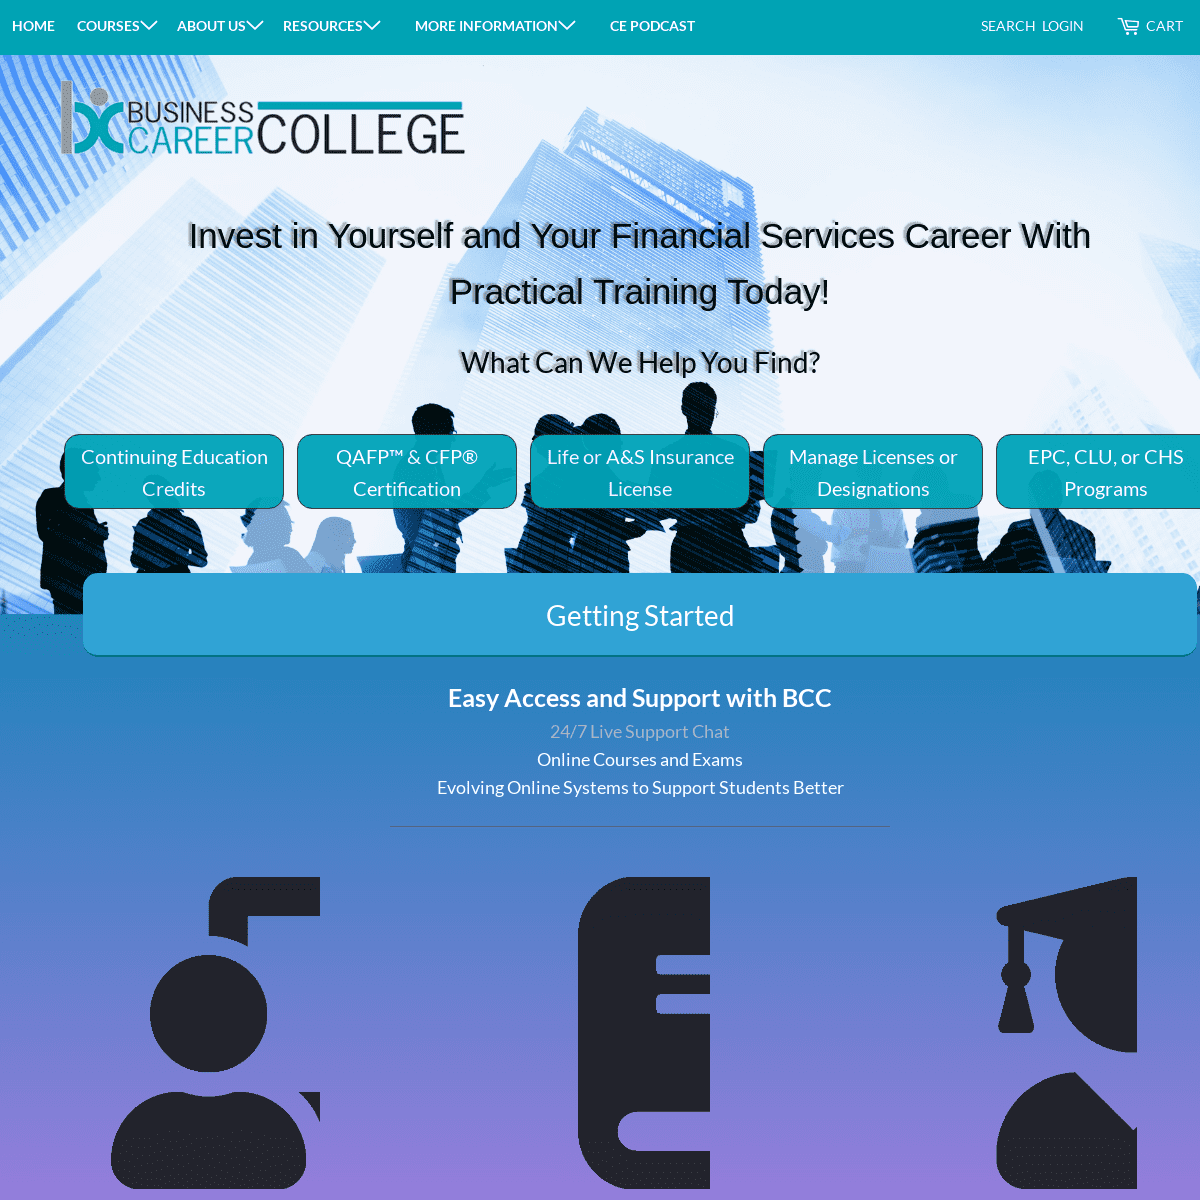 A complete backup of businesscareercollege.com